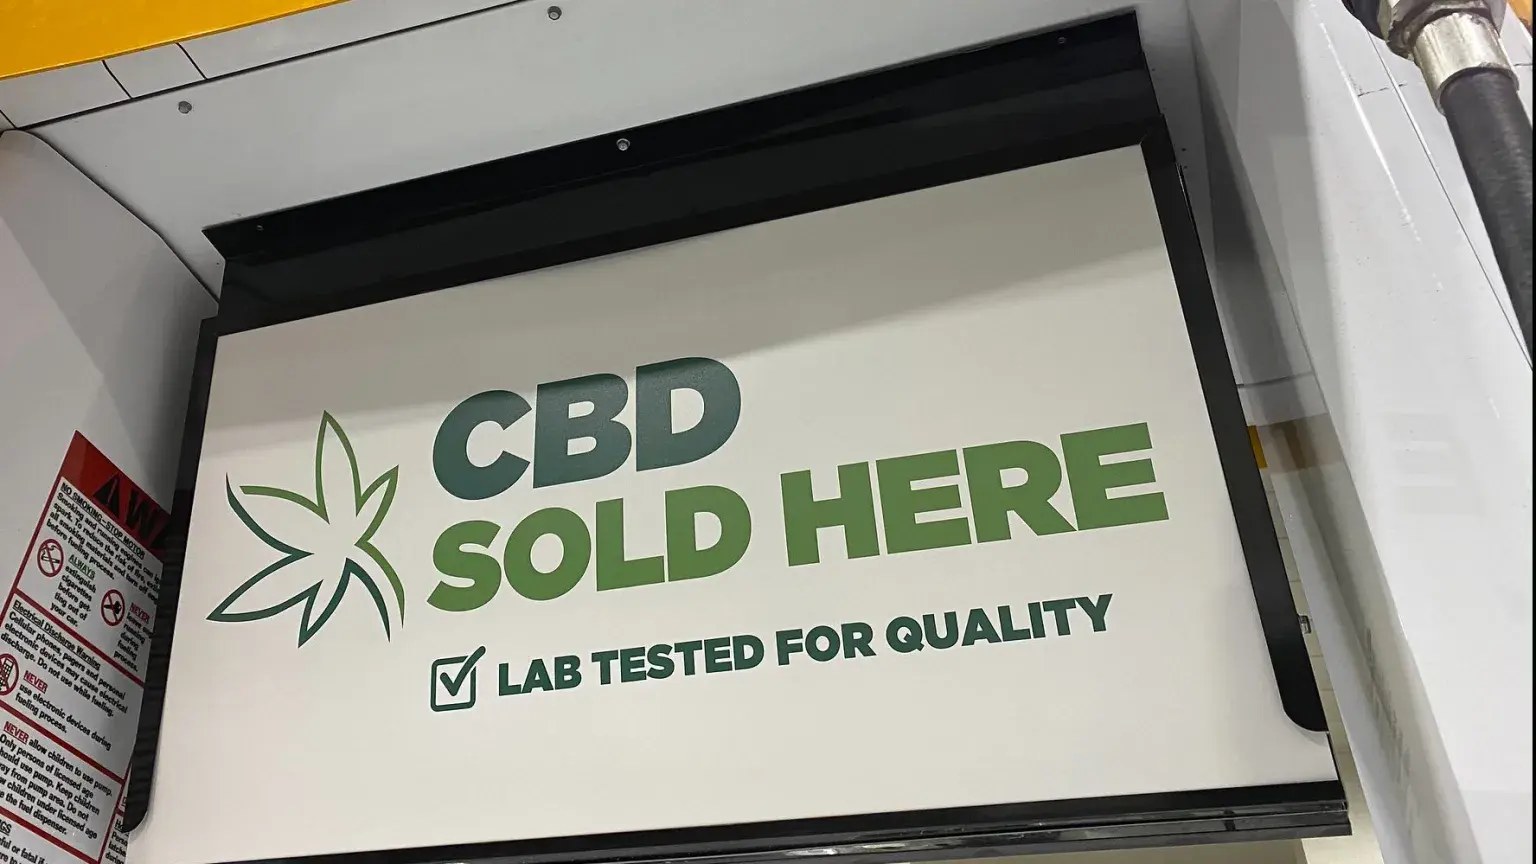 FDA’s Cannabis Advisor: Approach to CBD Rules Shouldn’t Let “Perfect be the Enemy of the Good